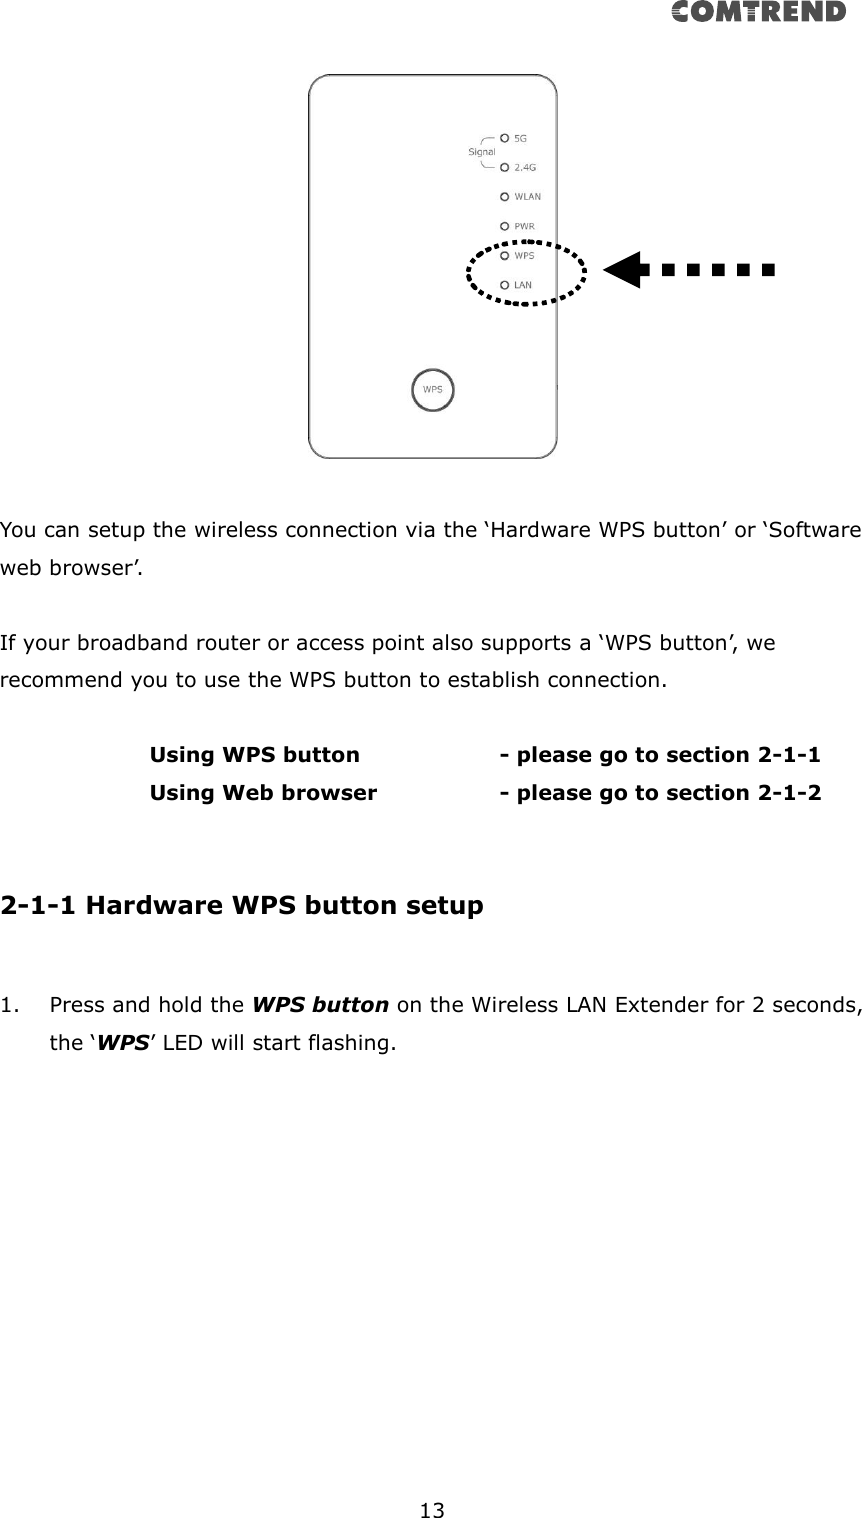       13    You can setup the wireless connection via the ‘Hardware WPS button’ or ‘Software web browser’.  If your broadband router or access point also supports a ‘WPS button’, we recommend you to use the WPS button to establish connection.    Using WPS button      - please go to section 2-1-1       Using Web browser      - please go to section 2-1-2   2-1-1 Hardware WPS button setup  1. Press and hold the WPS button on the Wireless LAN Extender for 2 seconds, the ‘WPS’ LED will start flashing. 